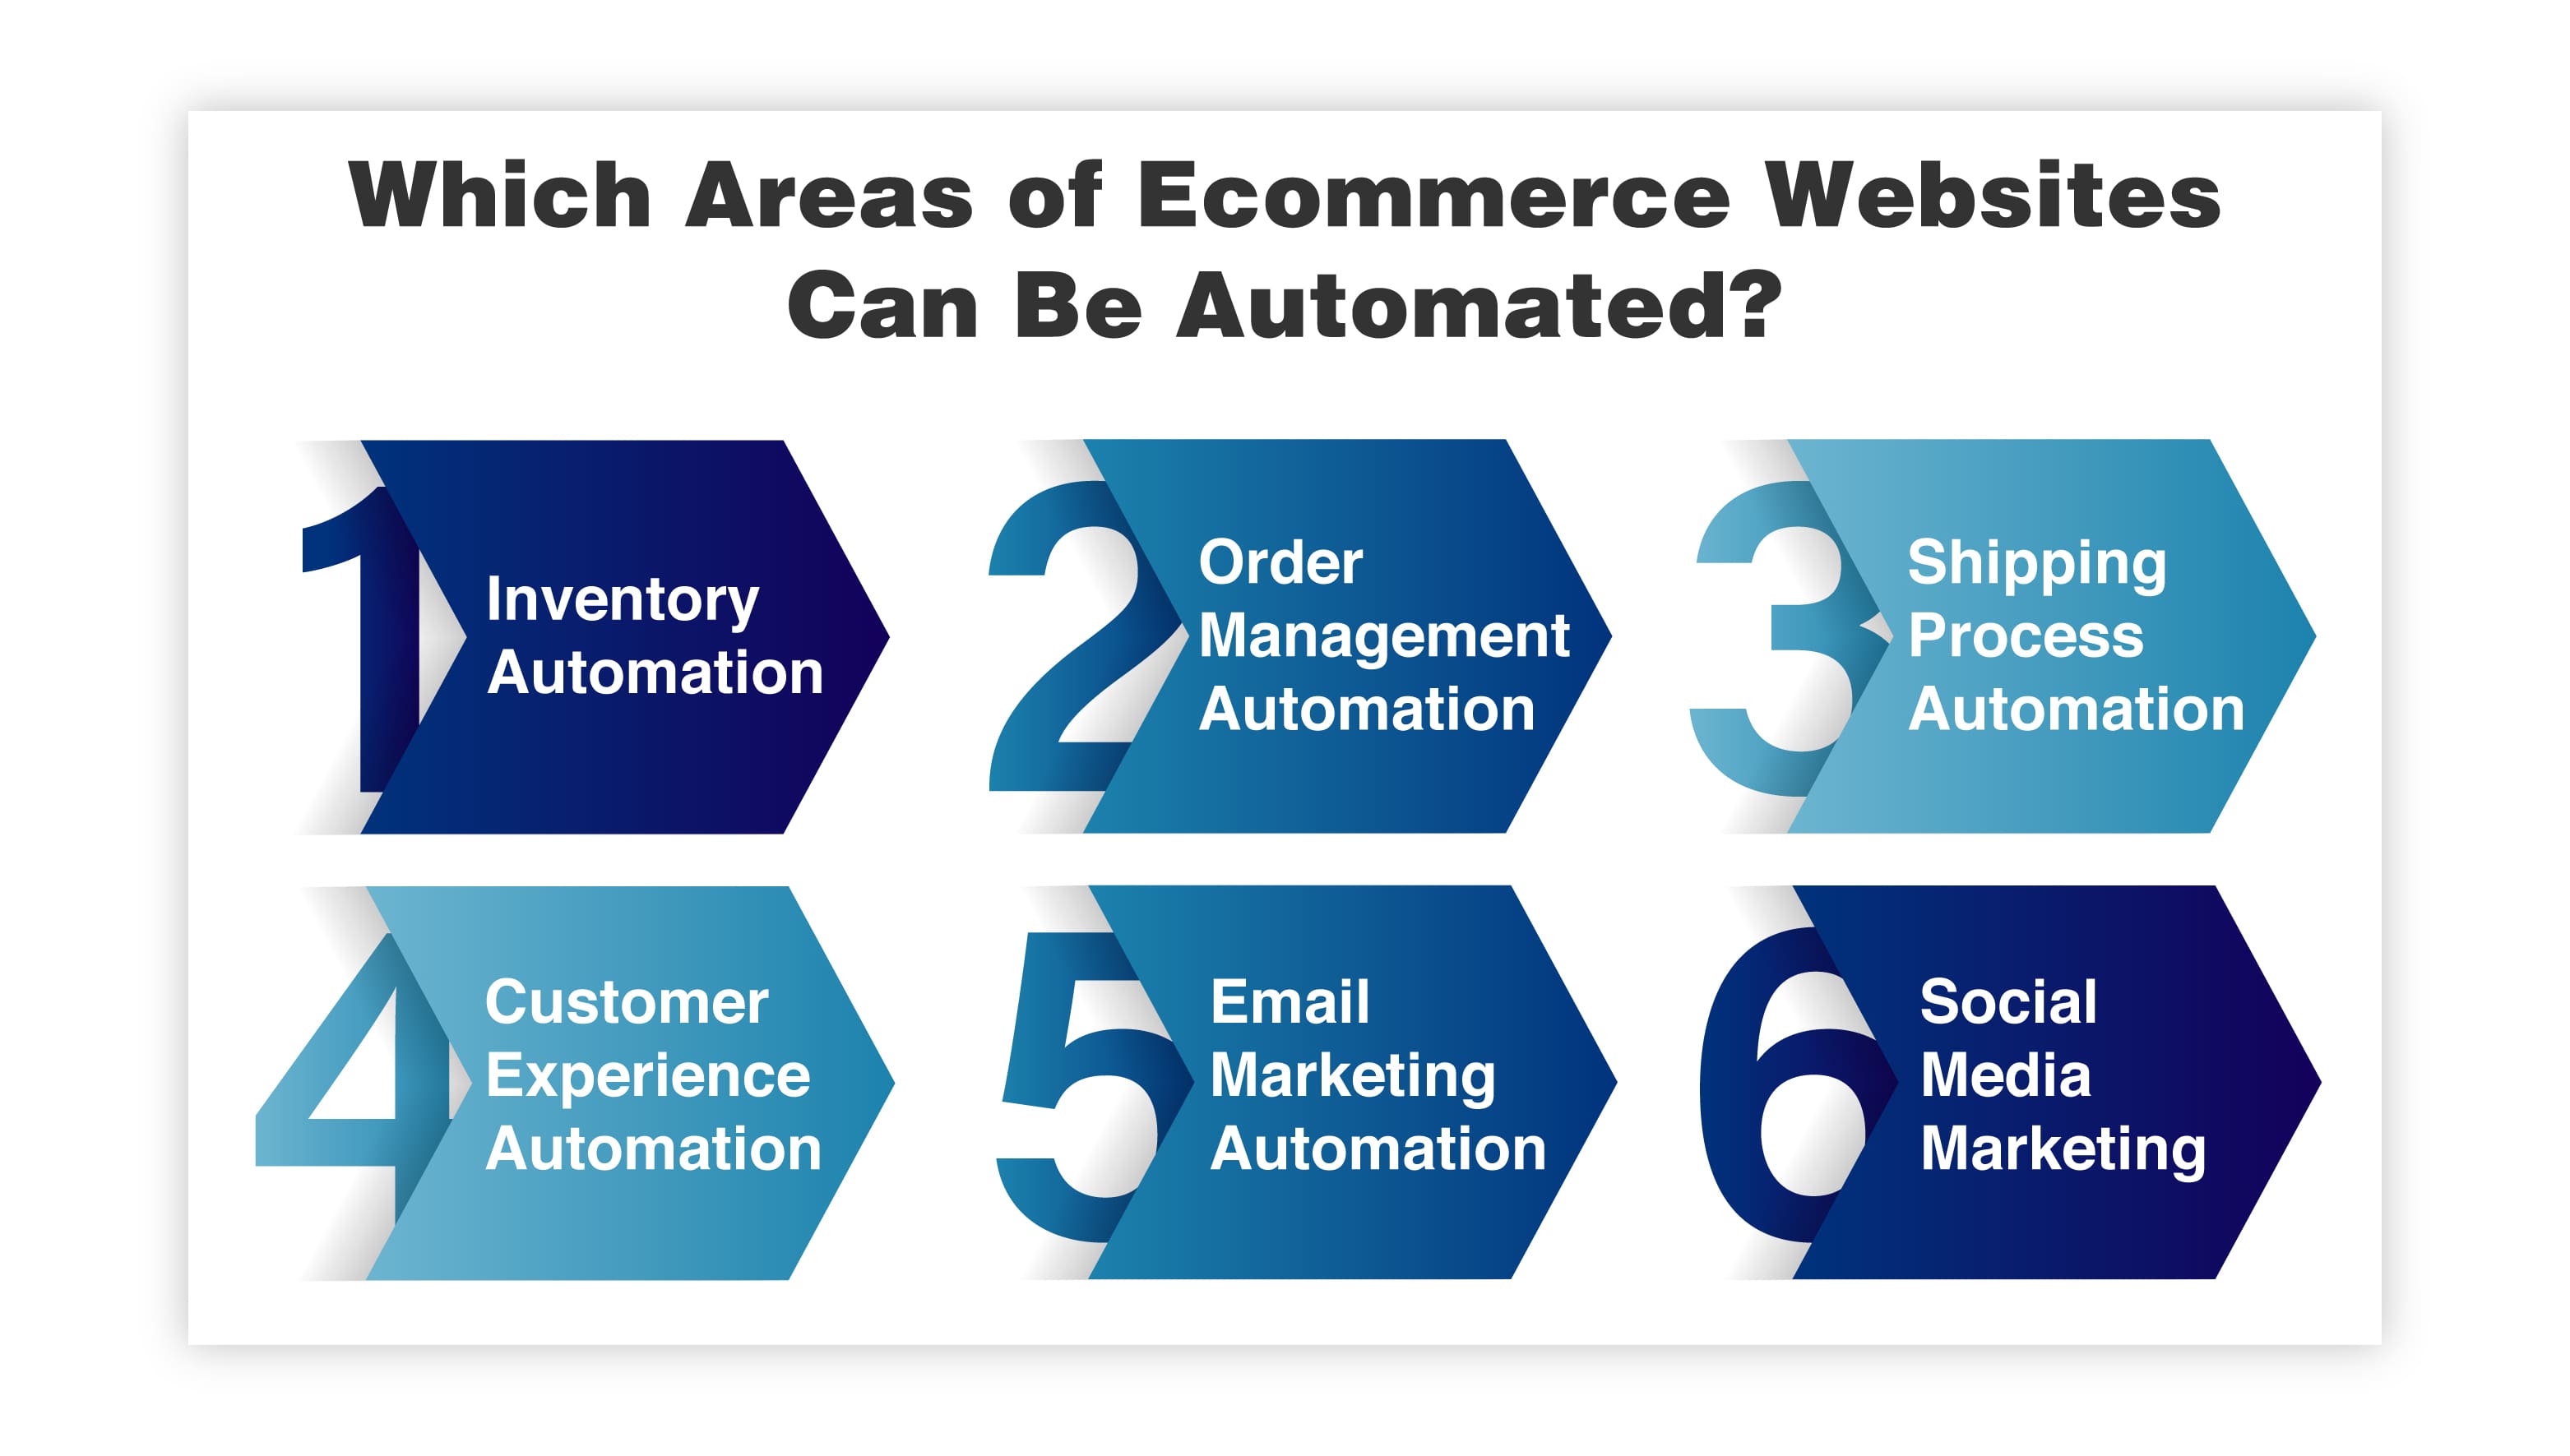 Areas of Ecommerce Websites Can Be Automated